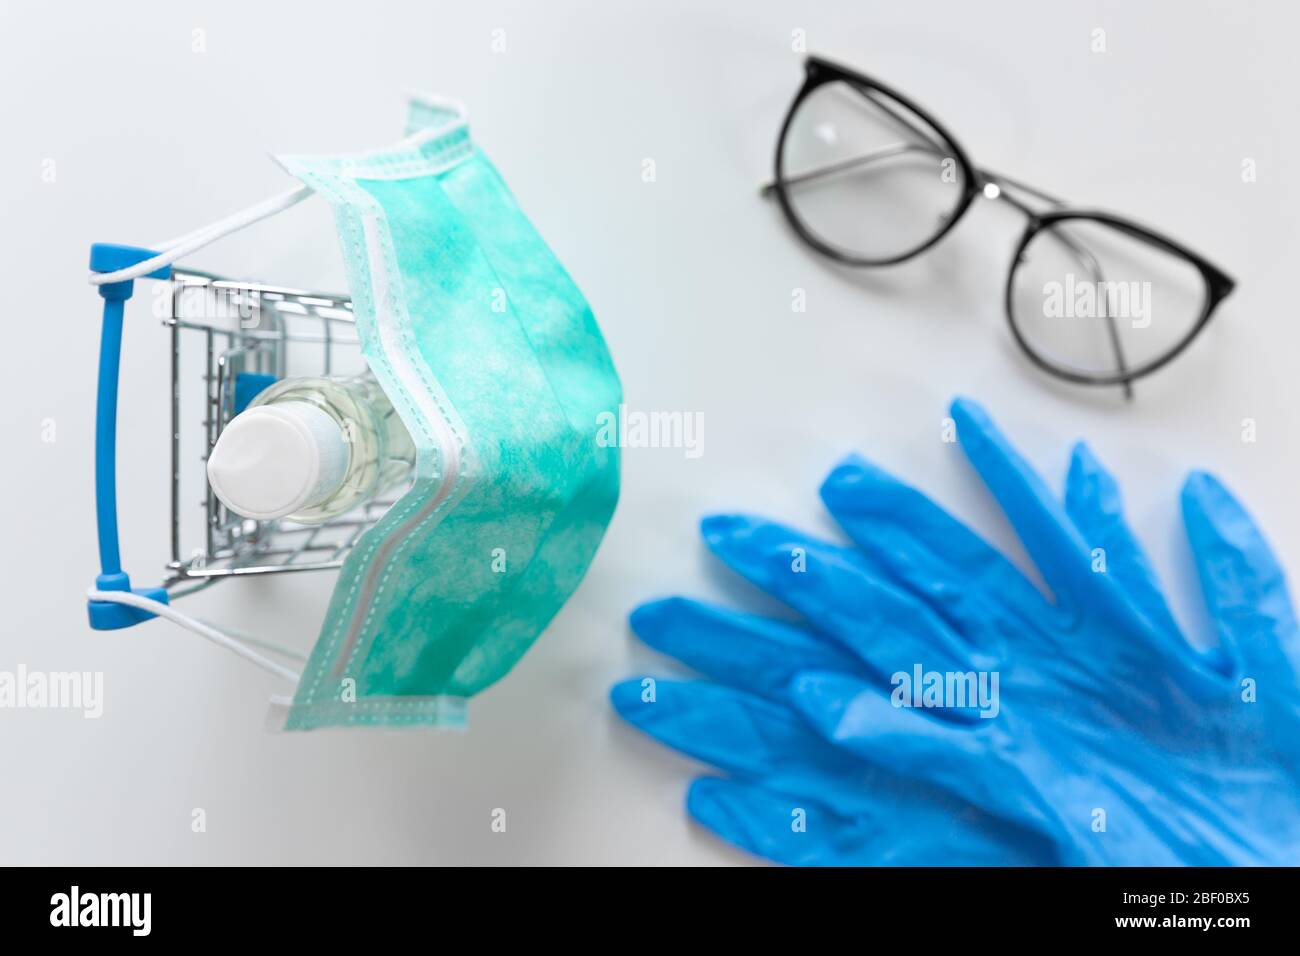 Shopping cart with facial mask hand sanitiser and blue gloves. Shopping and protection concept Stock Photo